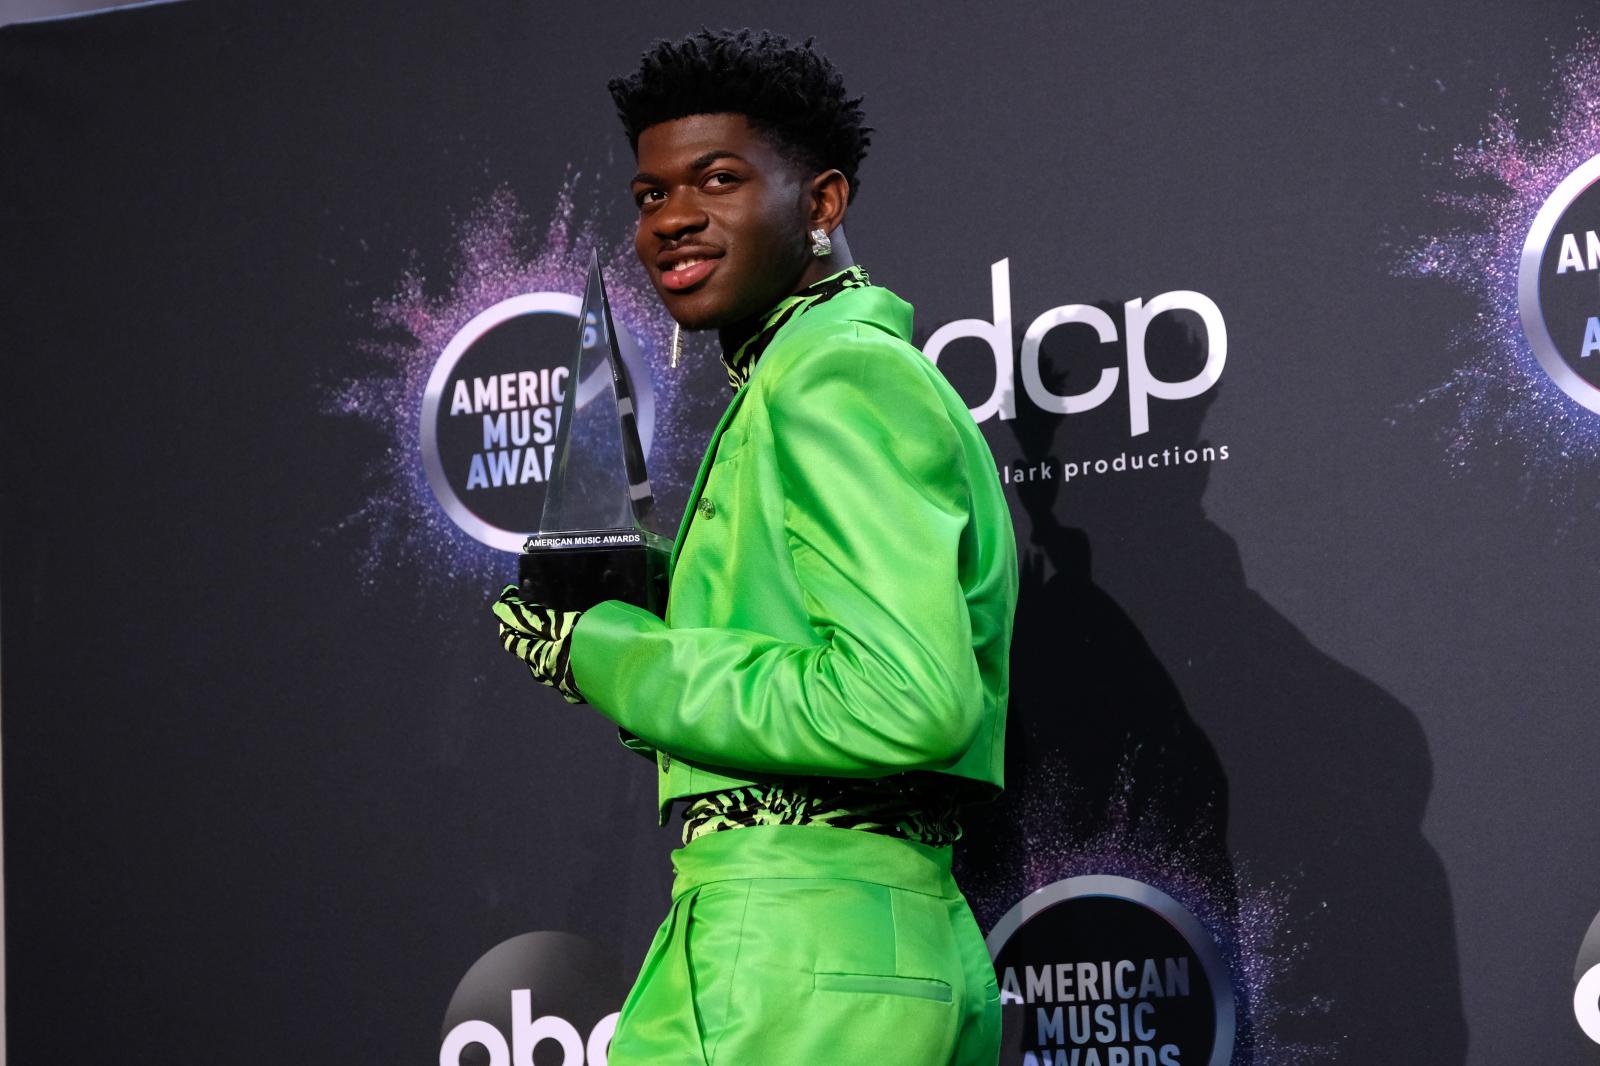 Image from RED CARPET I CELEBRITY - LOS ANGELES, CALIFORNIA - NOVEMBER 24: Lil Nas X poses in...